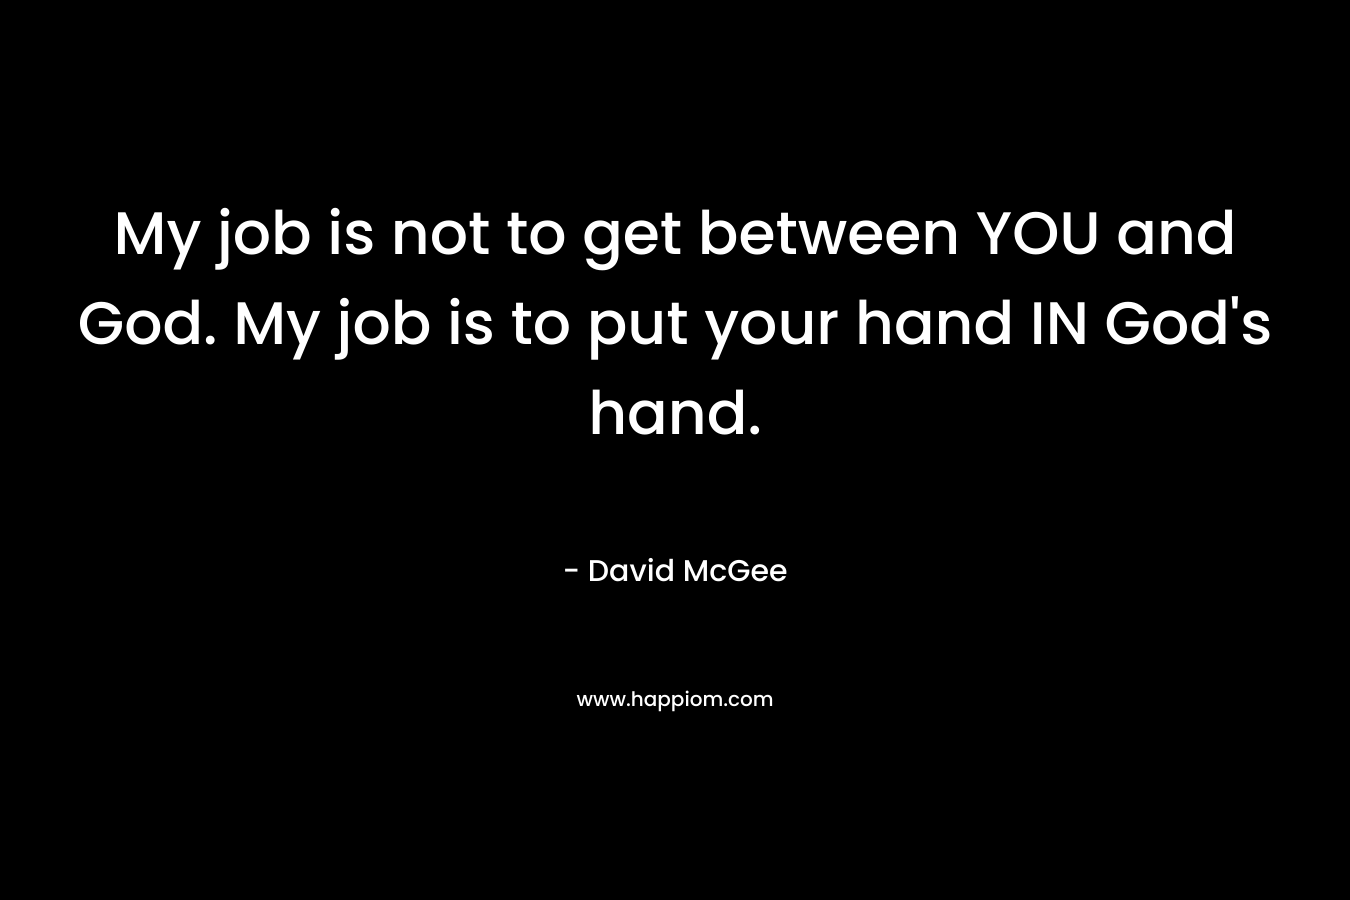 My job is not to get between YOU and God. My job is to put your hand IN God's hand.